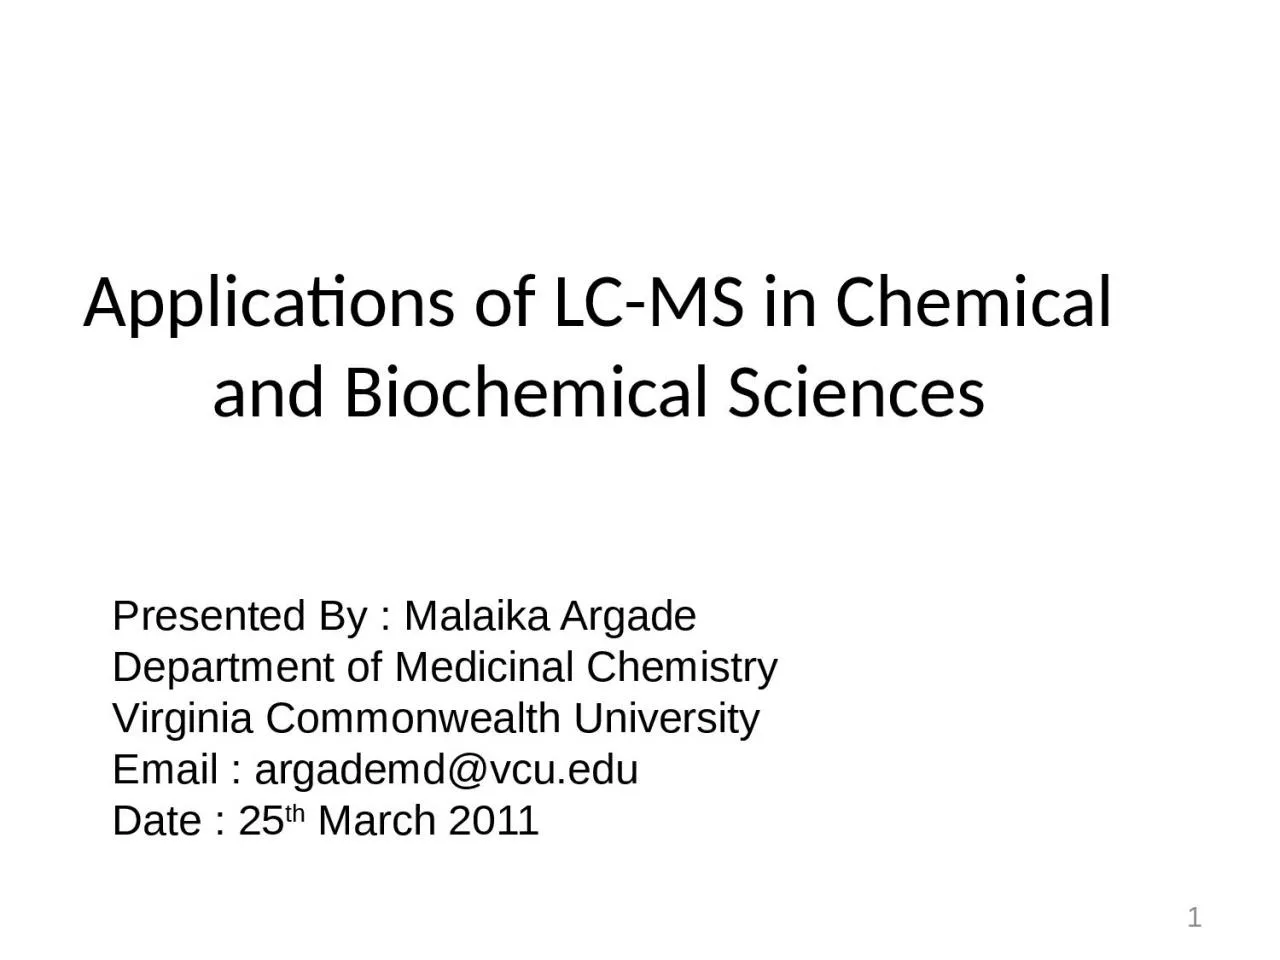 Applications of LC-MS in Chemical and Biochemical Sciences